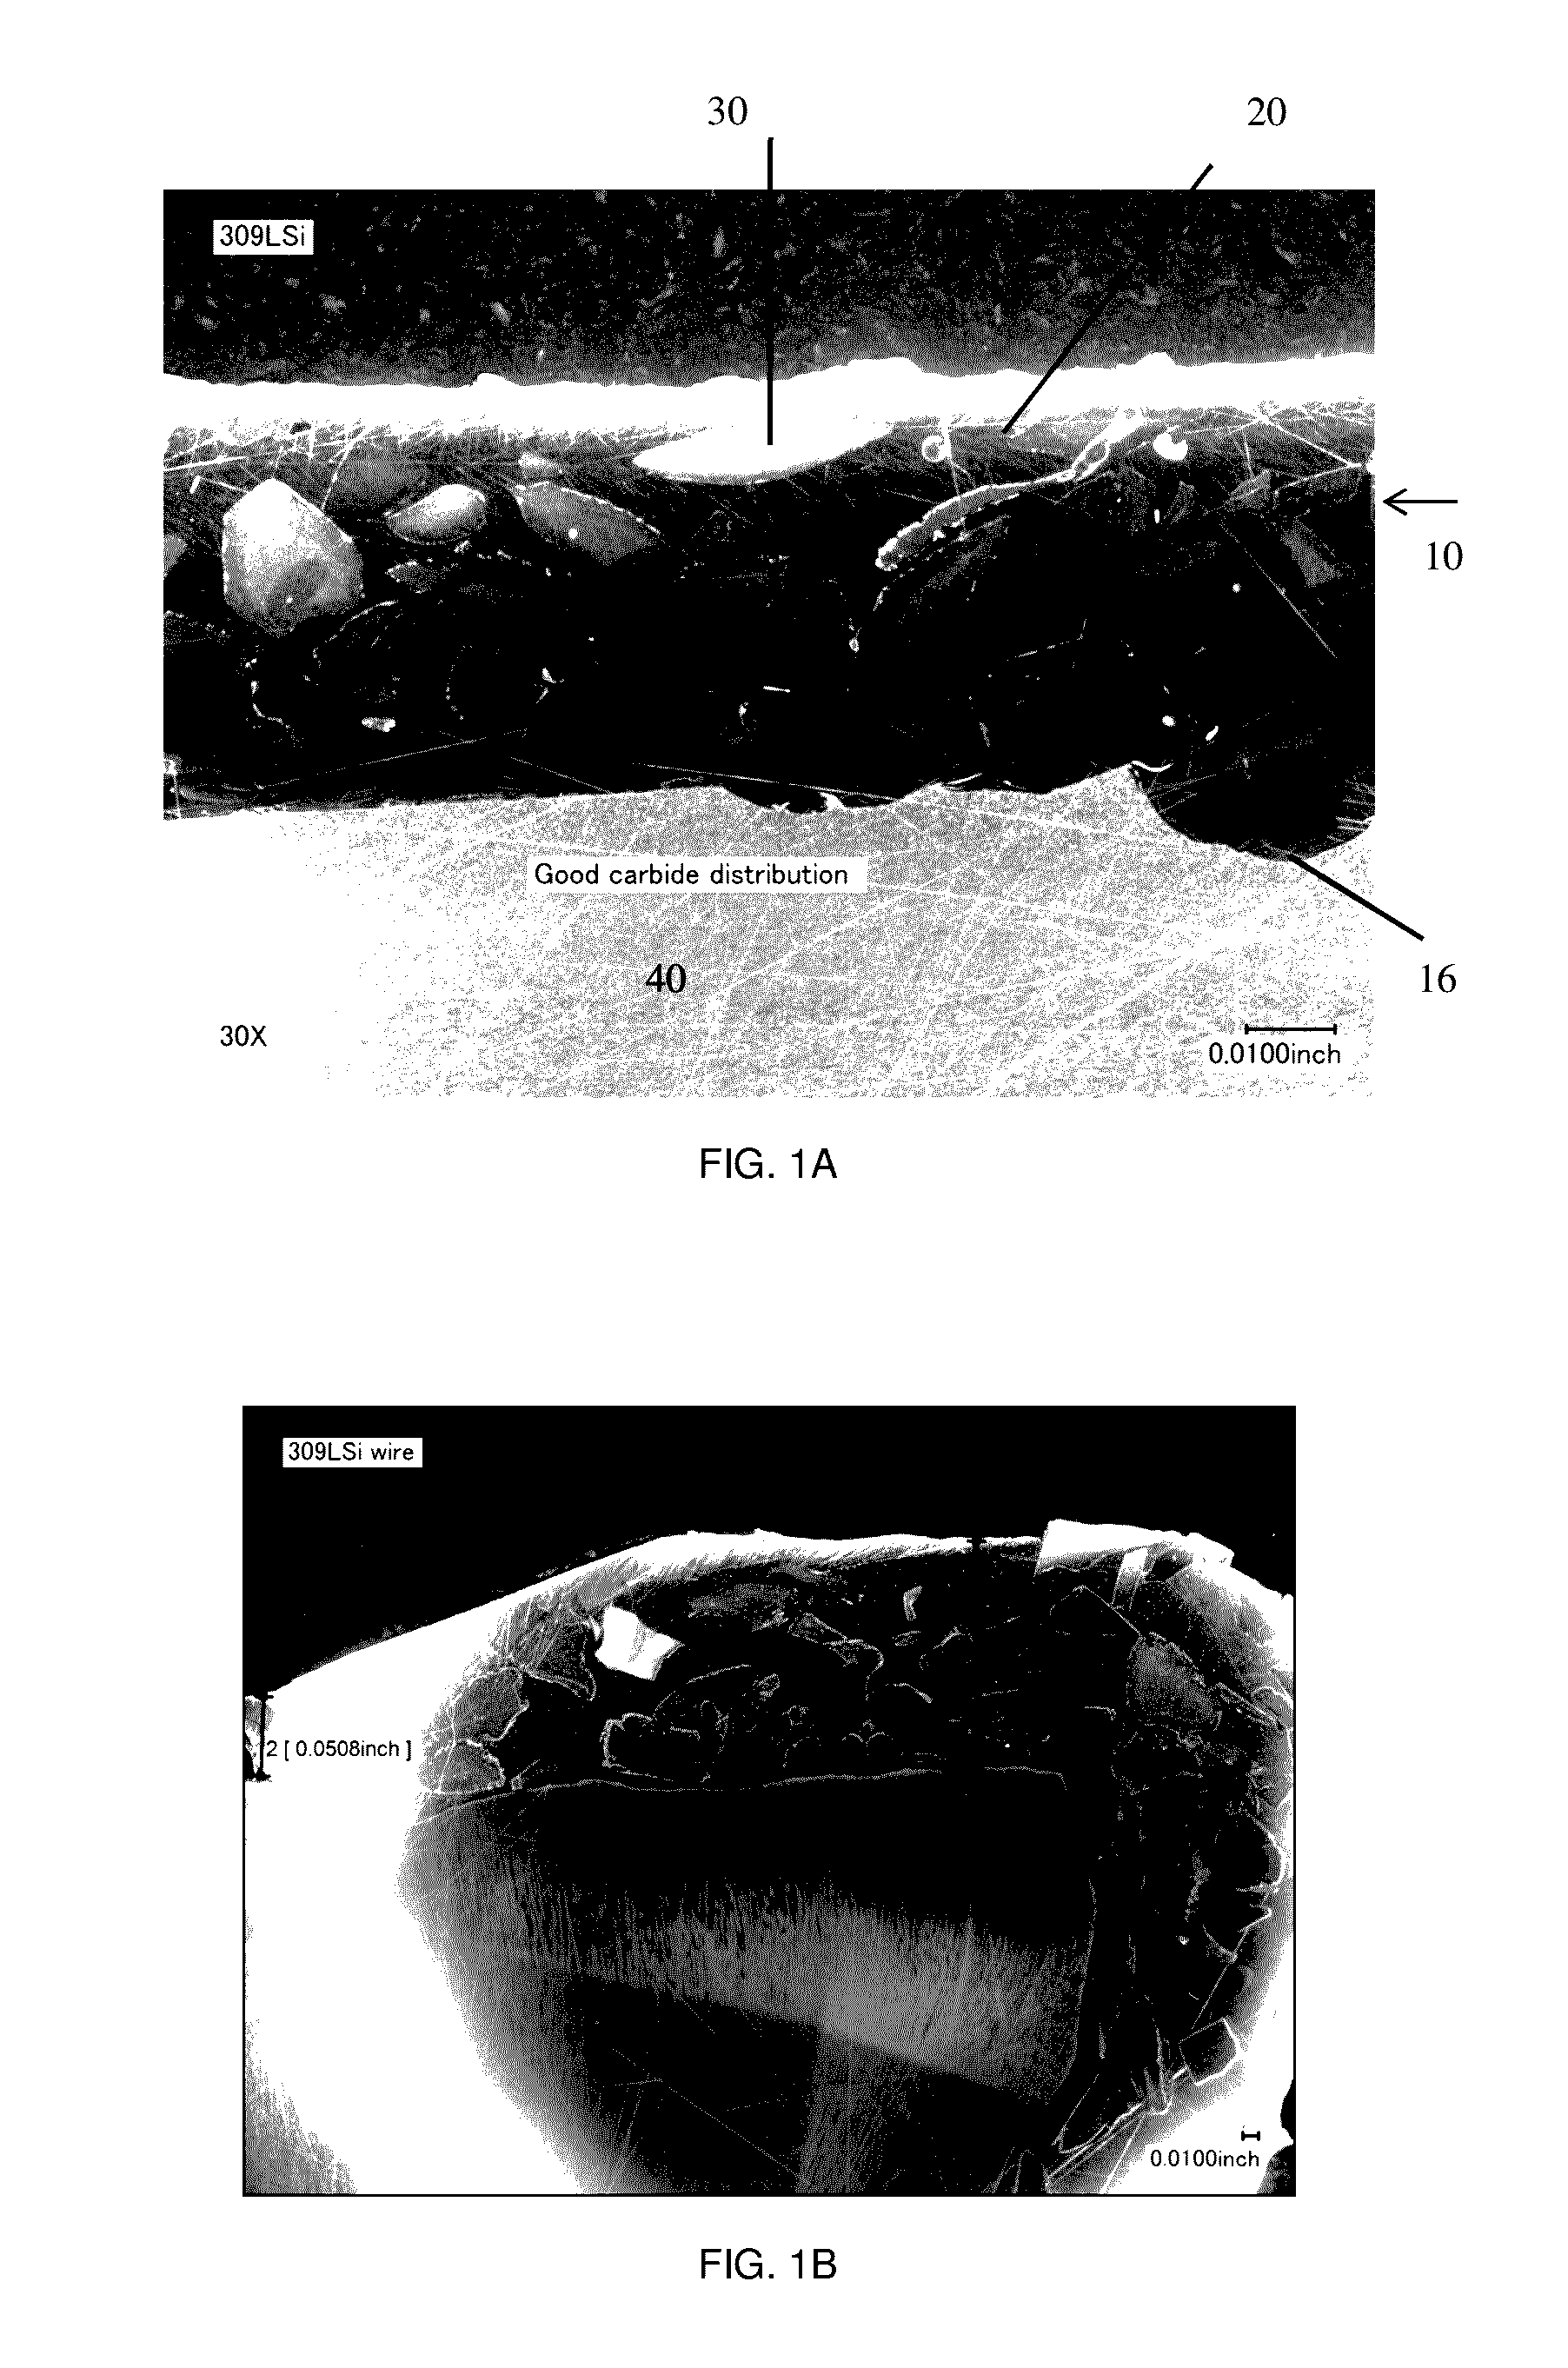 Hardfacing incorporating carbide particles